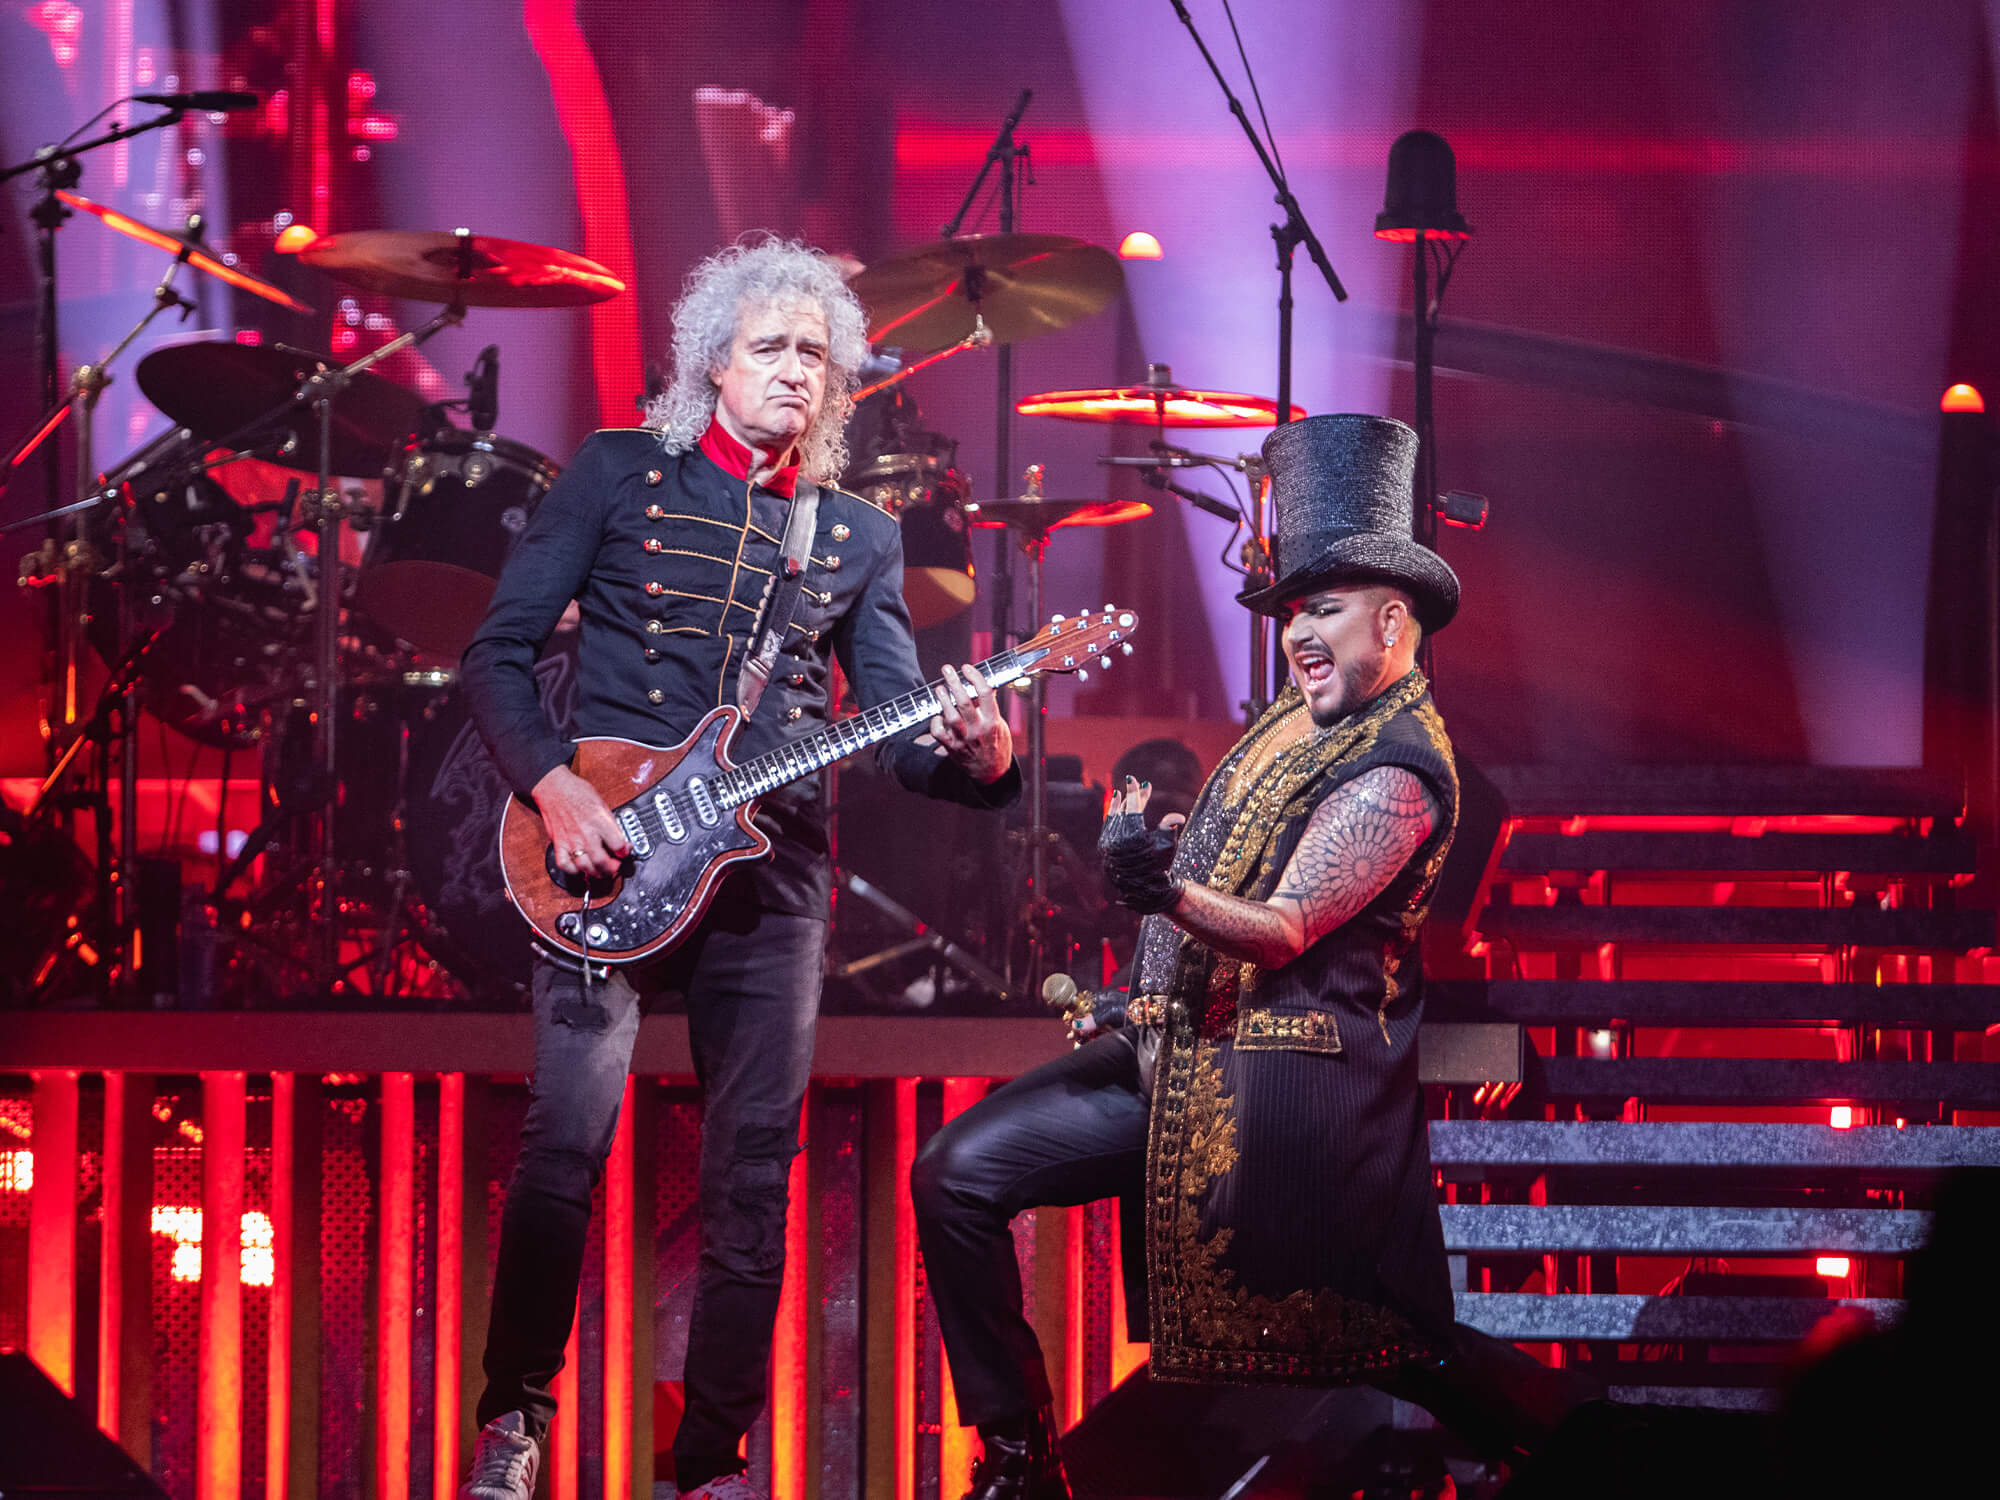 Brian May with his Red Special. Adam Lambert is down on one knee next to him wearing a top hat and playing air guitar.